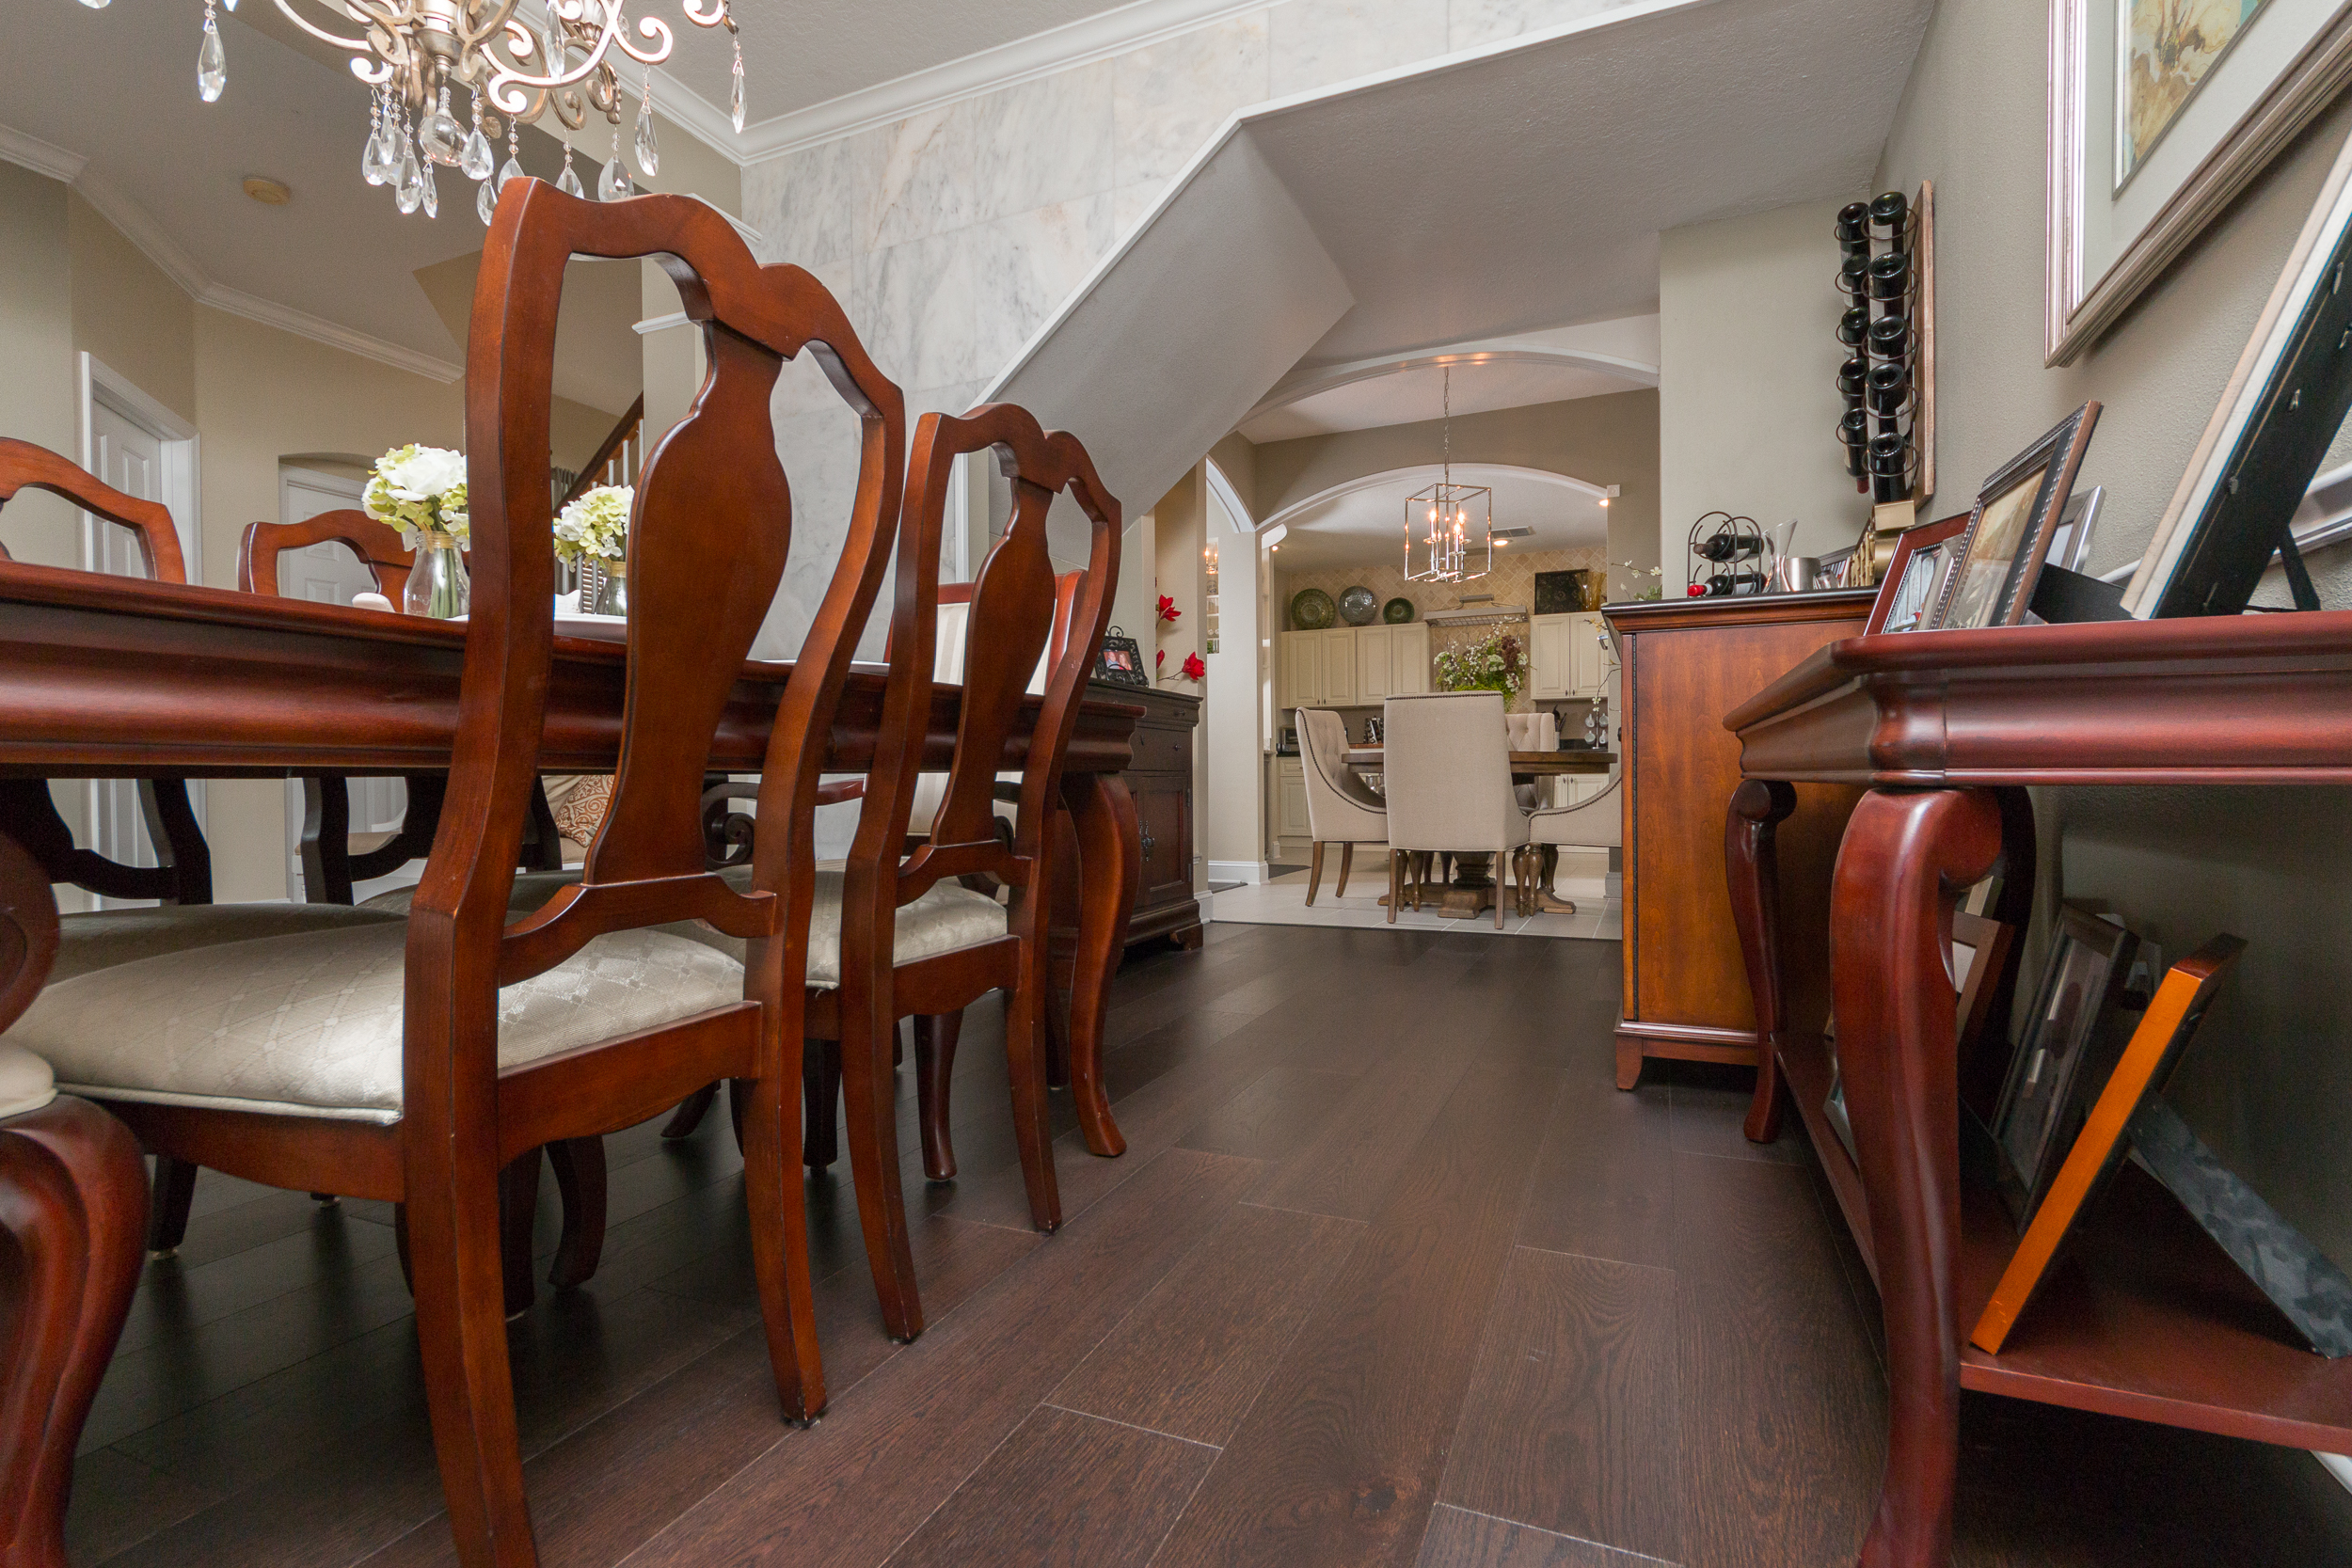 Mellow Oak Wood Flooring with Tile in Dining Room with cherry wood furniture